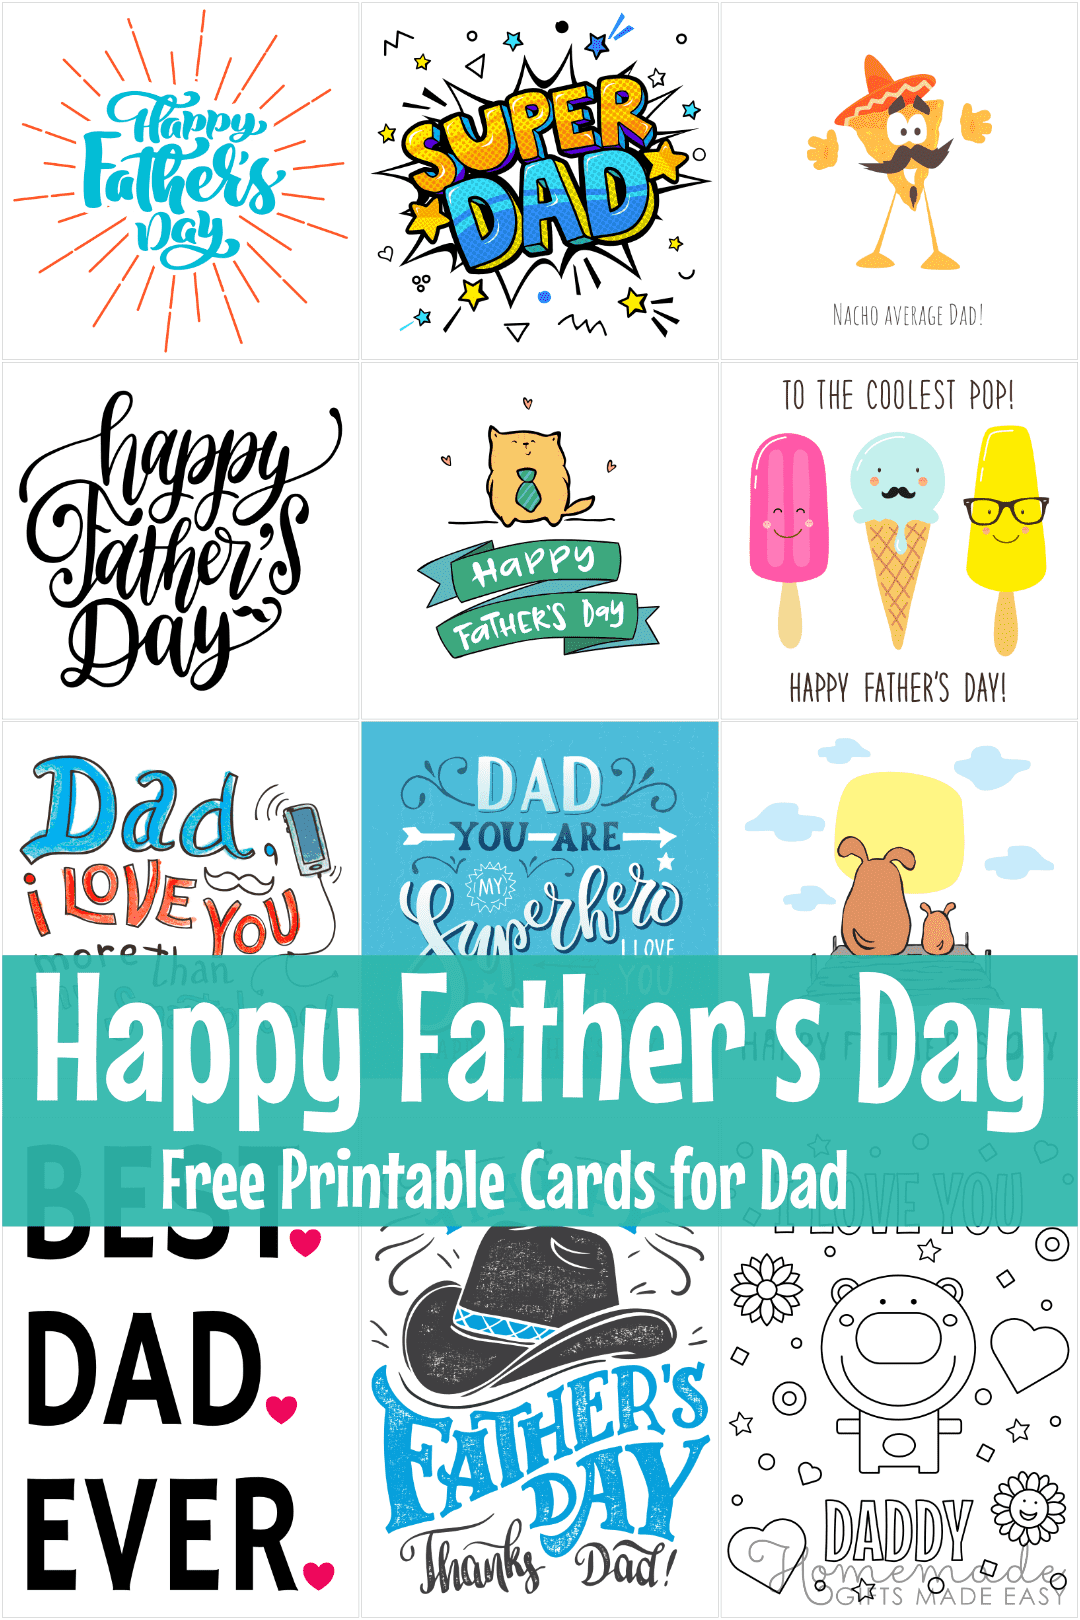 online-printable-fathers-day-cards-free-printable-cards